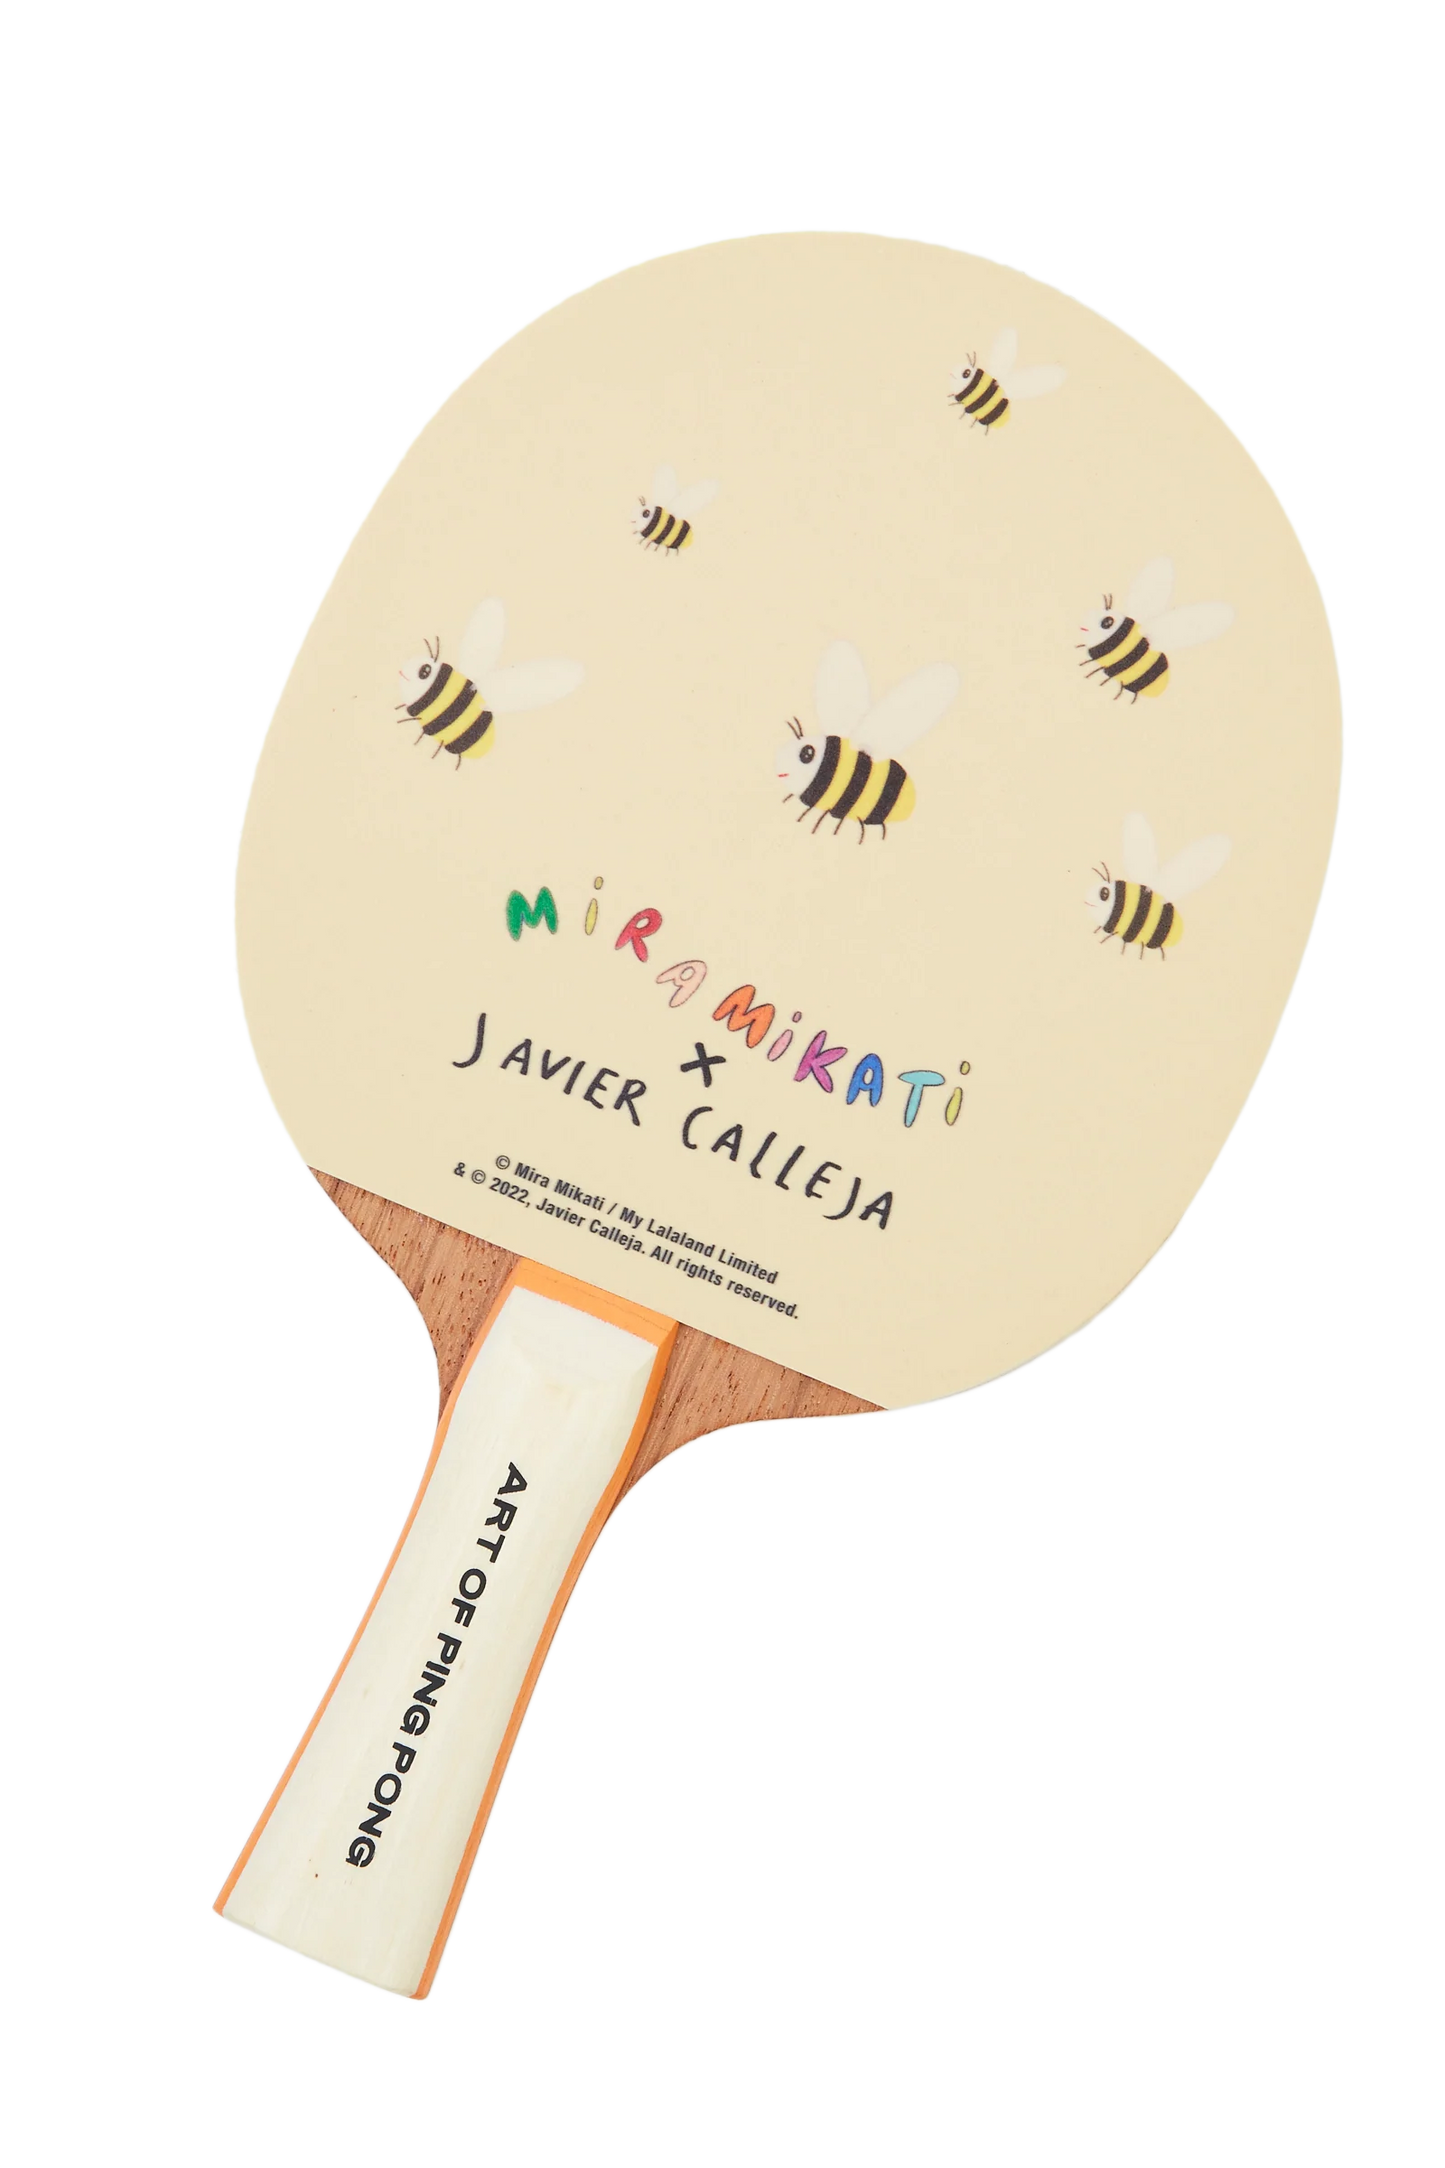 Javier Calleja x Mira Mikati Tennis Bat Set  Colour: Multi Table tennis racket set Part of the Mira Mikati x Javier Calleja collaboration Spanish artist, Javier Calleja balances the saccharine and cynical in wide-eyed portraits that have been translated into a fun collaboration with Mira Mikati. Included is this limited edition table tennis bat set that can be used for either display or play, depicting artwork of one of Javier’s signature characters chasing bumblebees.